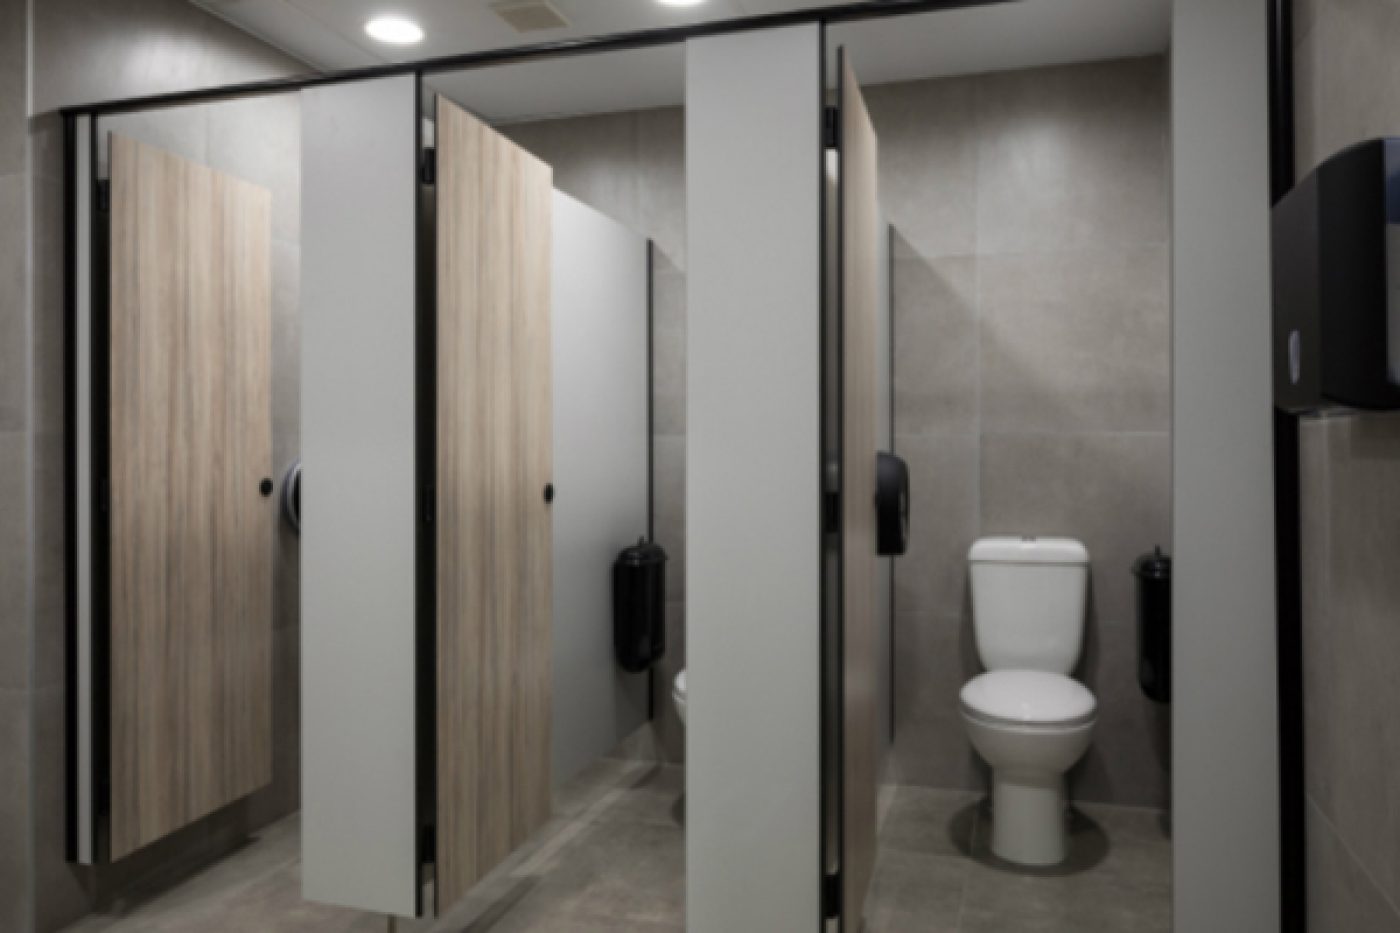 Restroom cubicles featuring black Pod Petite manual units installed in side wall